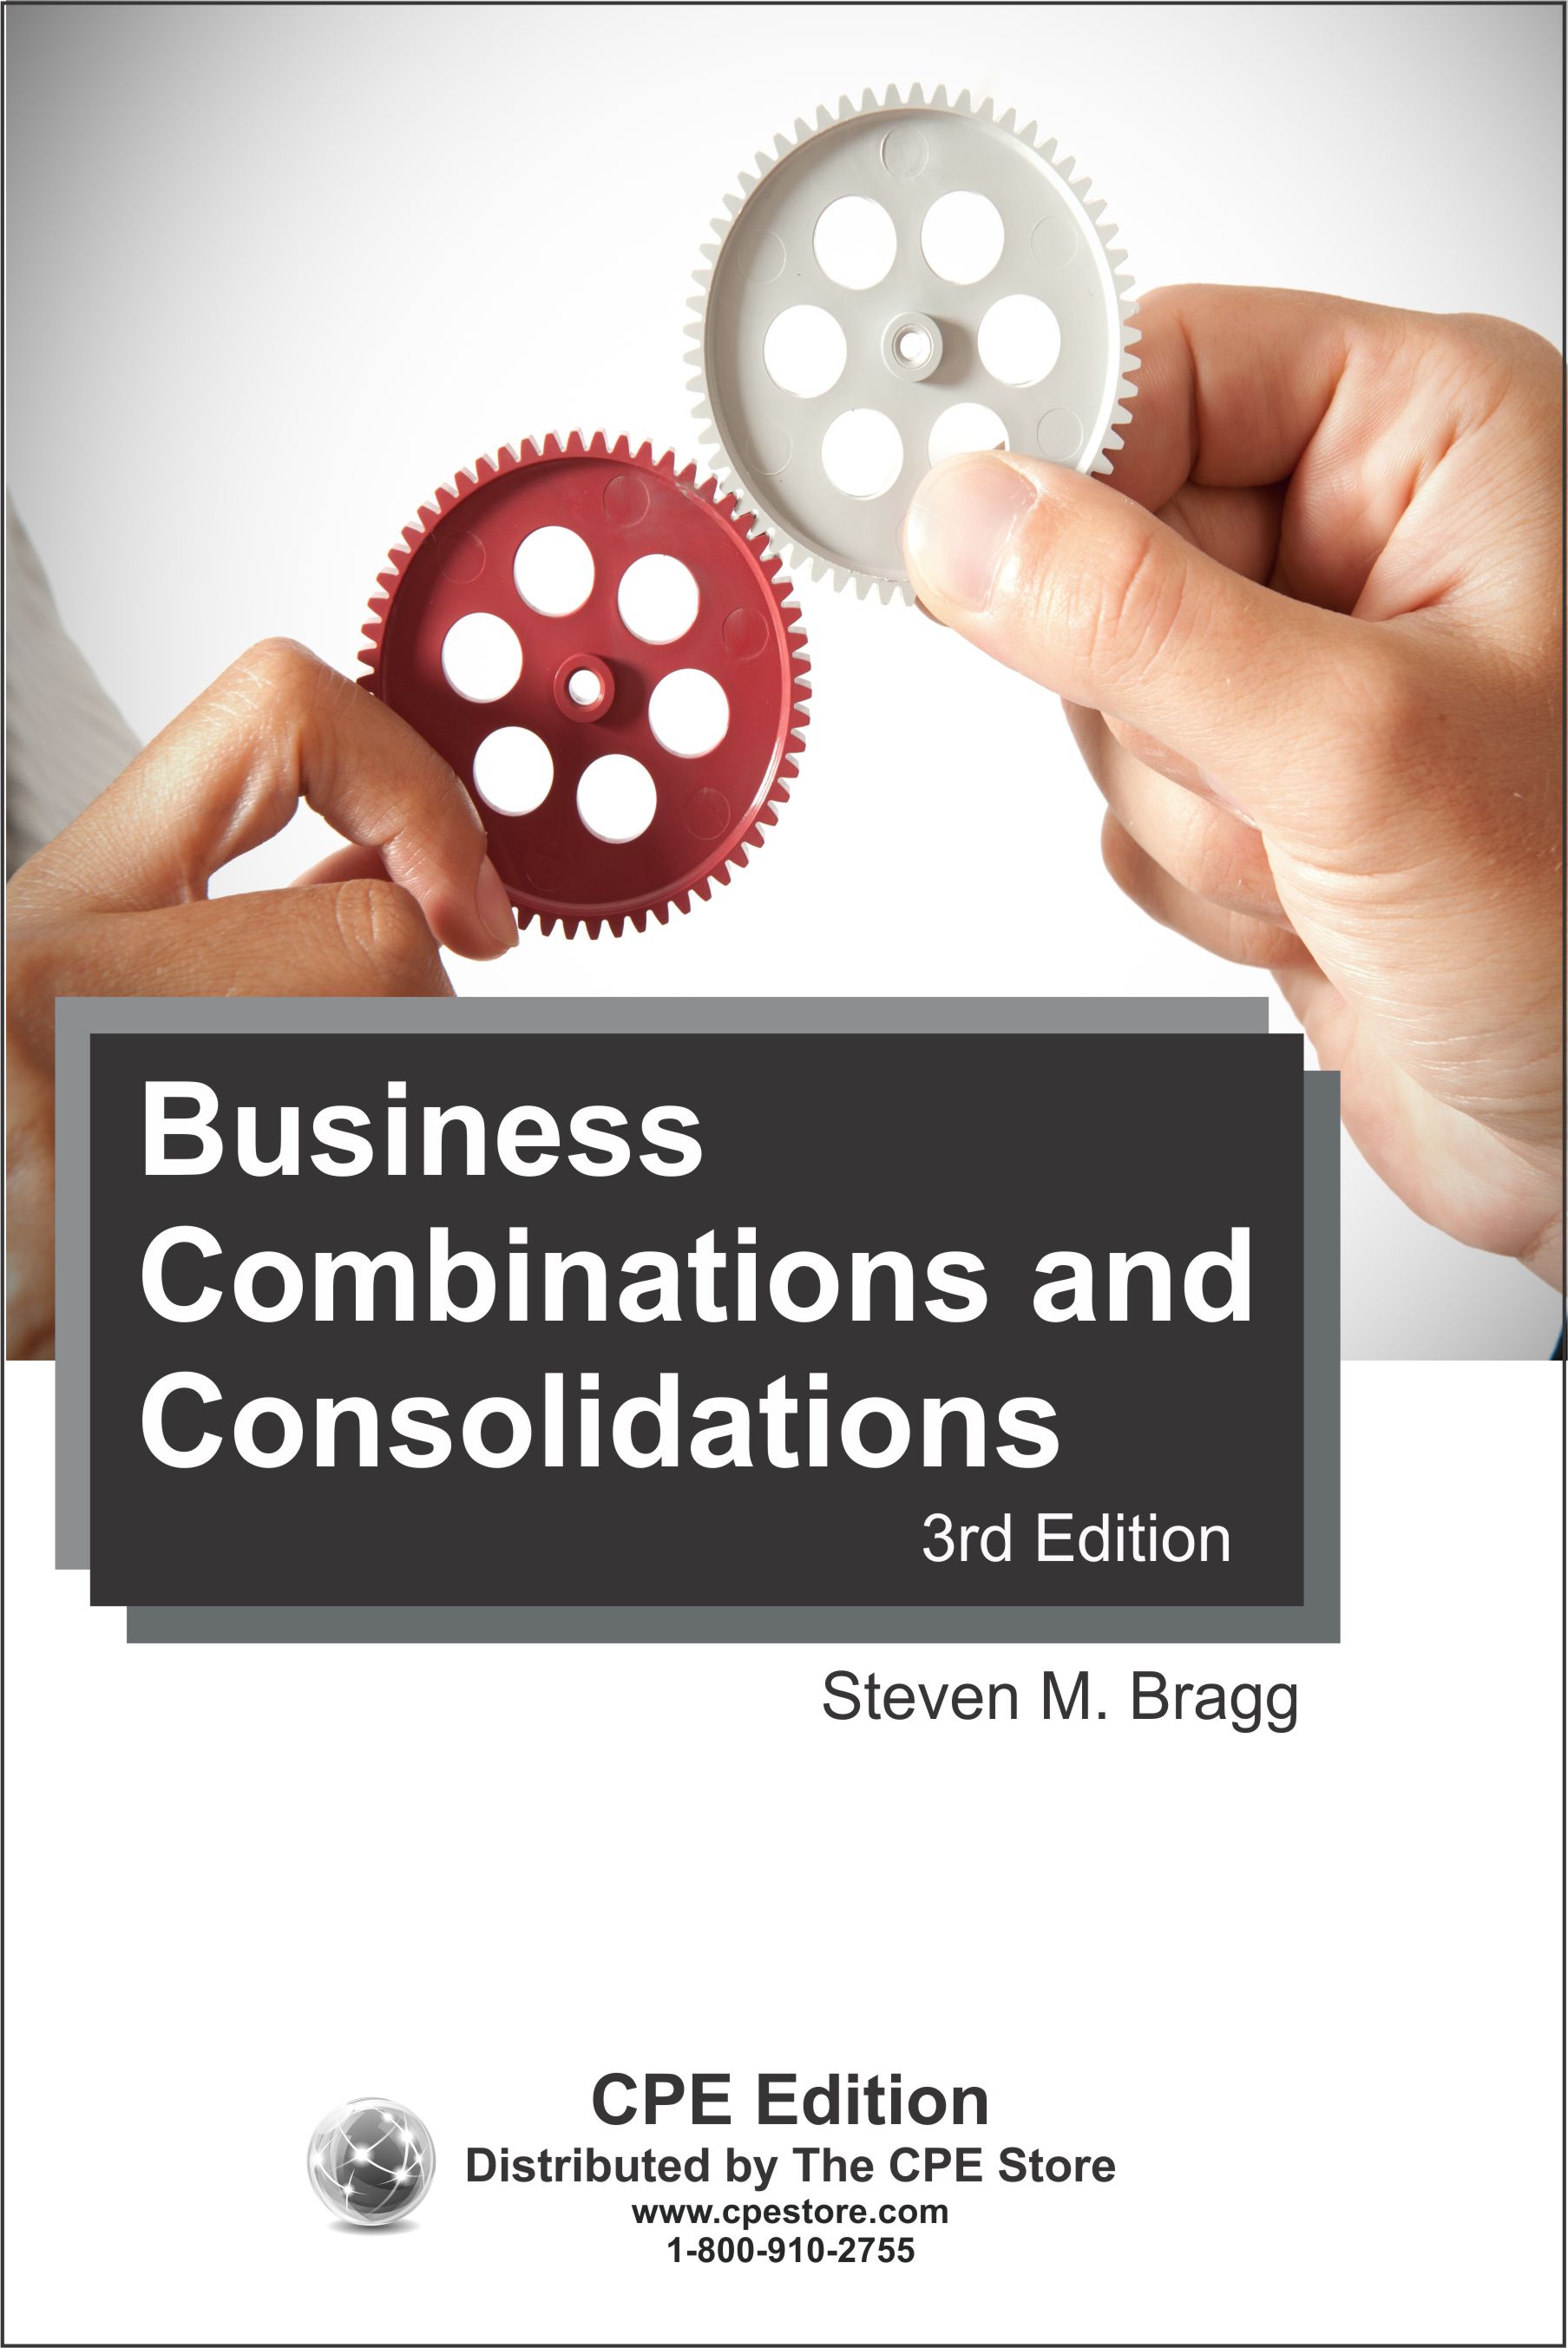 Business Combinations and Consolidations